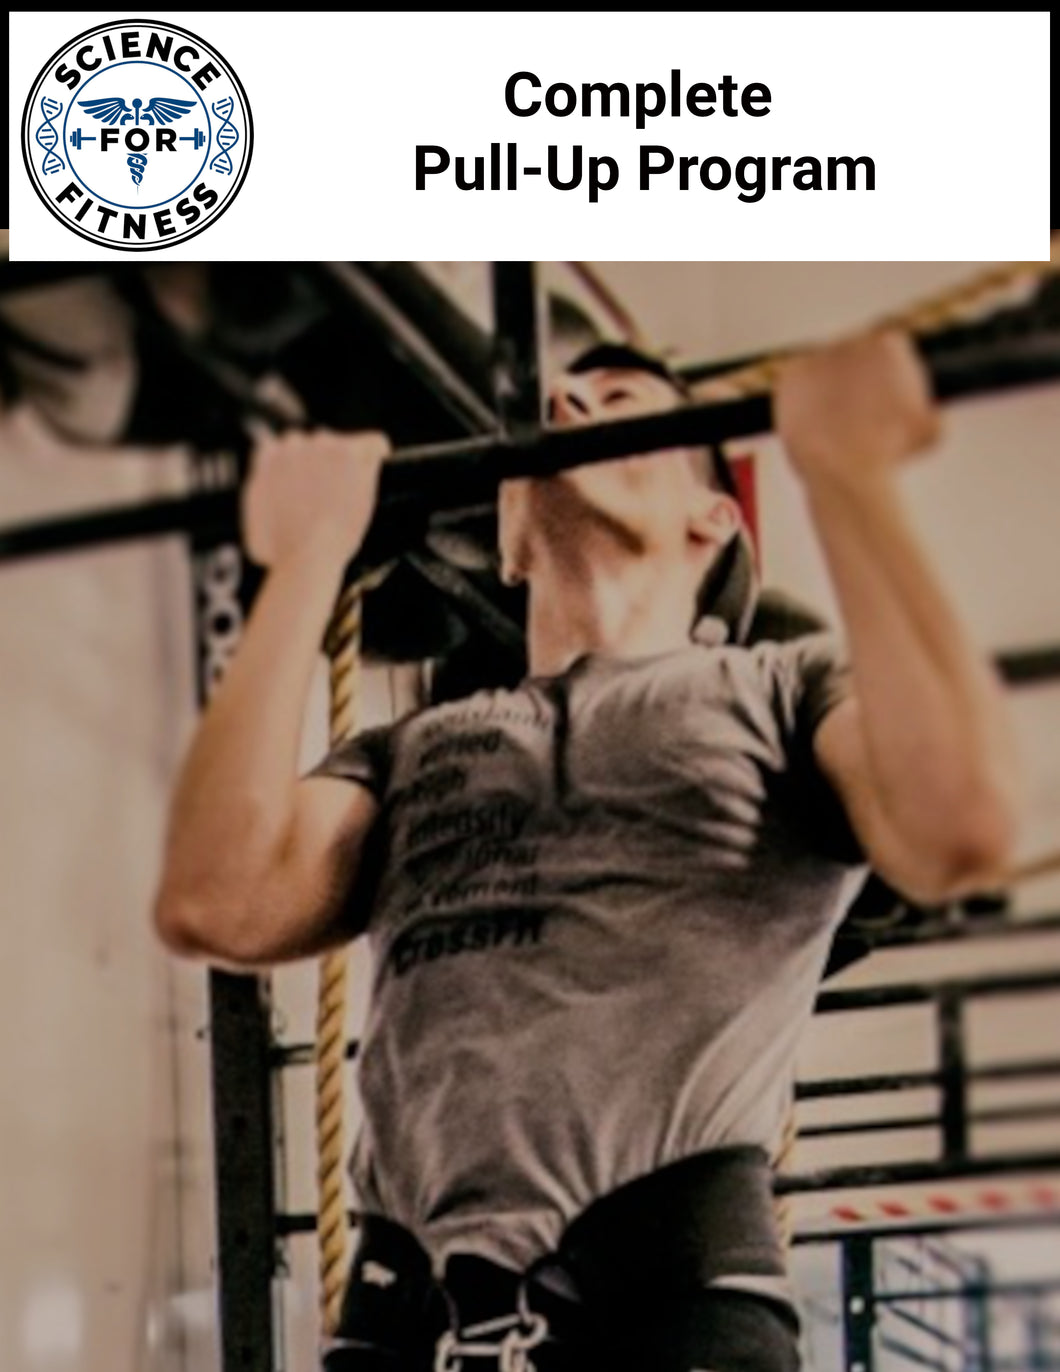 Complete Pull-Up Program